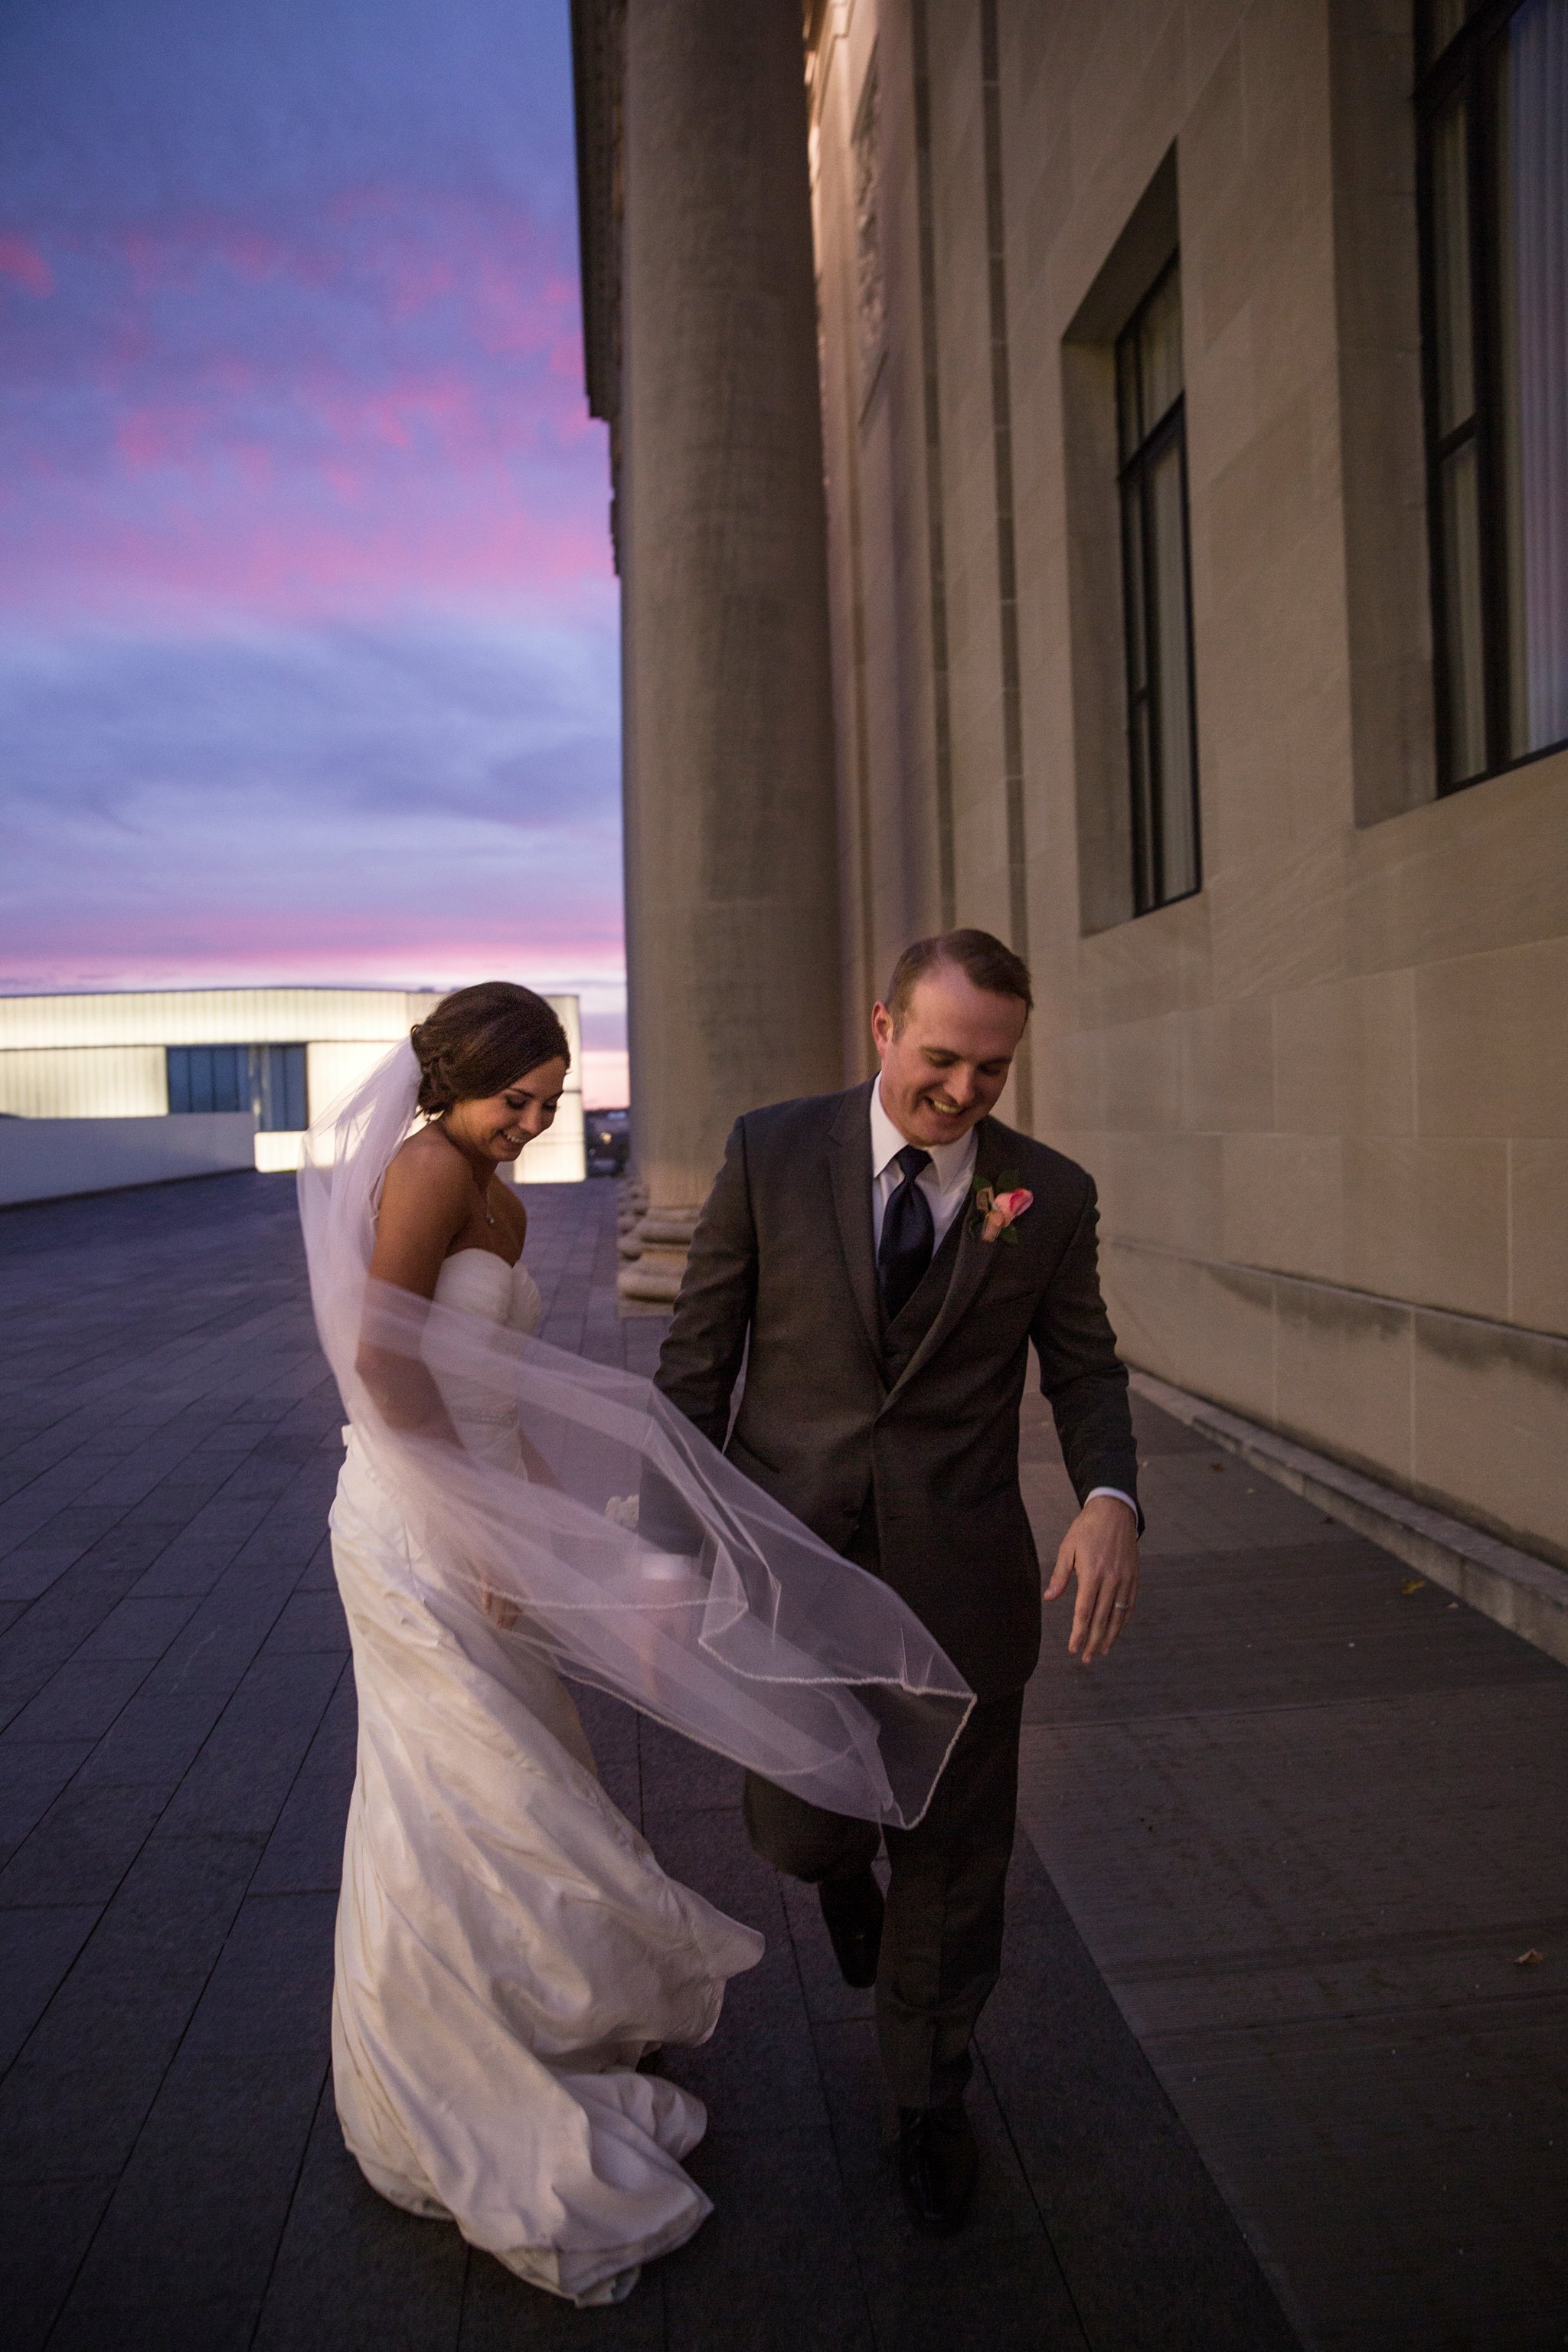 wedding | wedding photos | wedding photography | images by feliciathephotographer.com | Country Club Plaza | Kansas City | Unity Temple | Nelson Atkins Museum of Art | sunset photography | sunset portraits | bride and groom portraits | purple sky | laughing | candid | billowing veil 